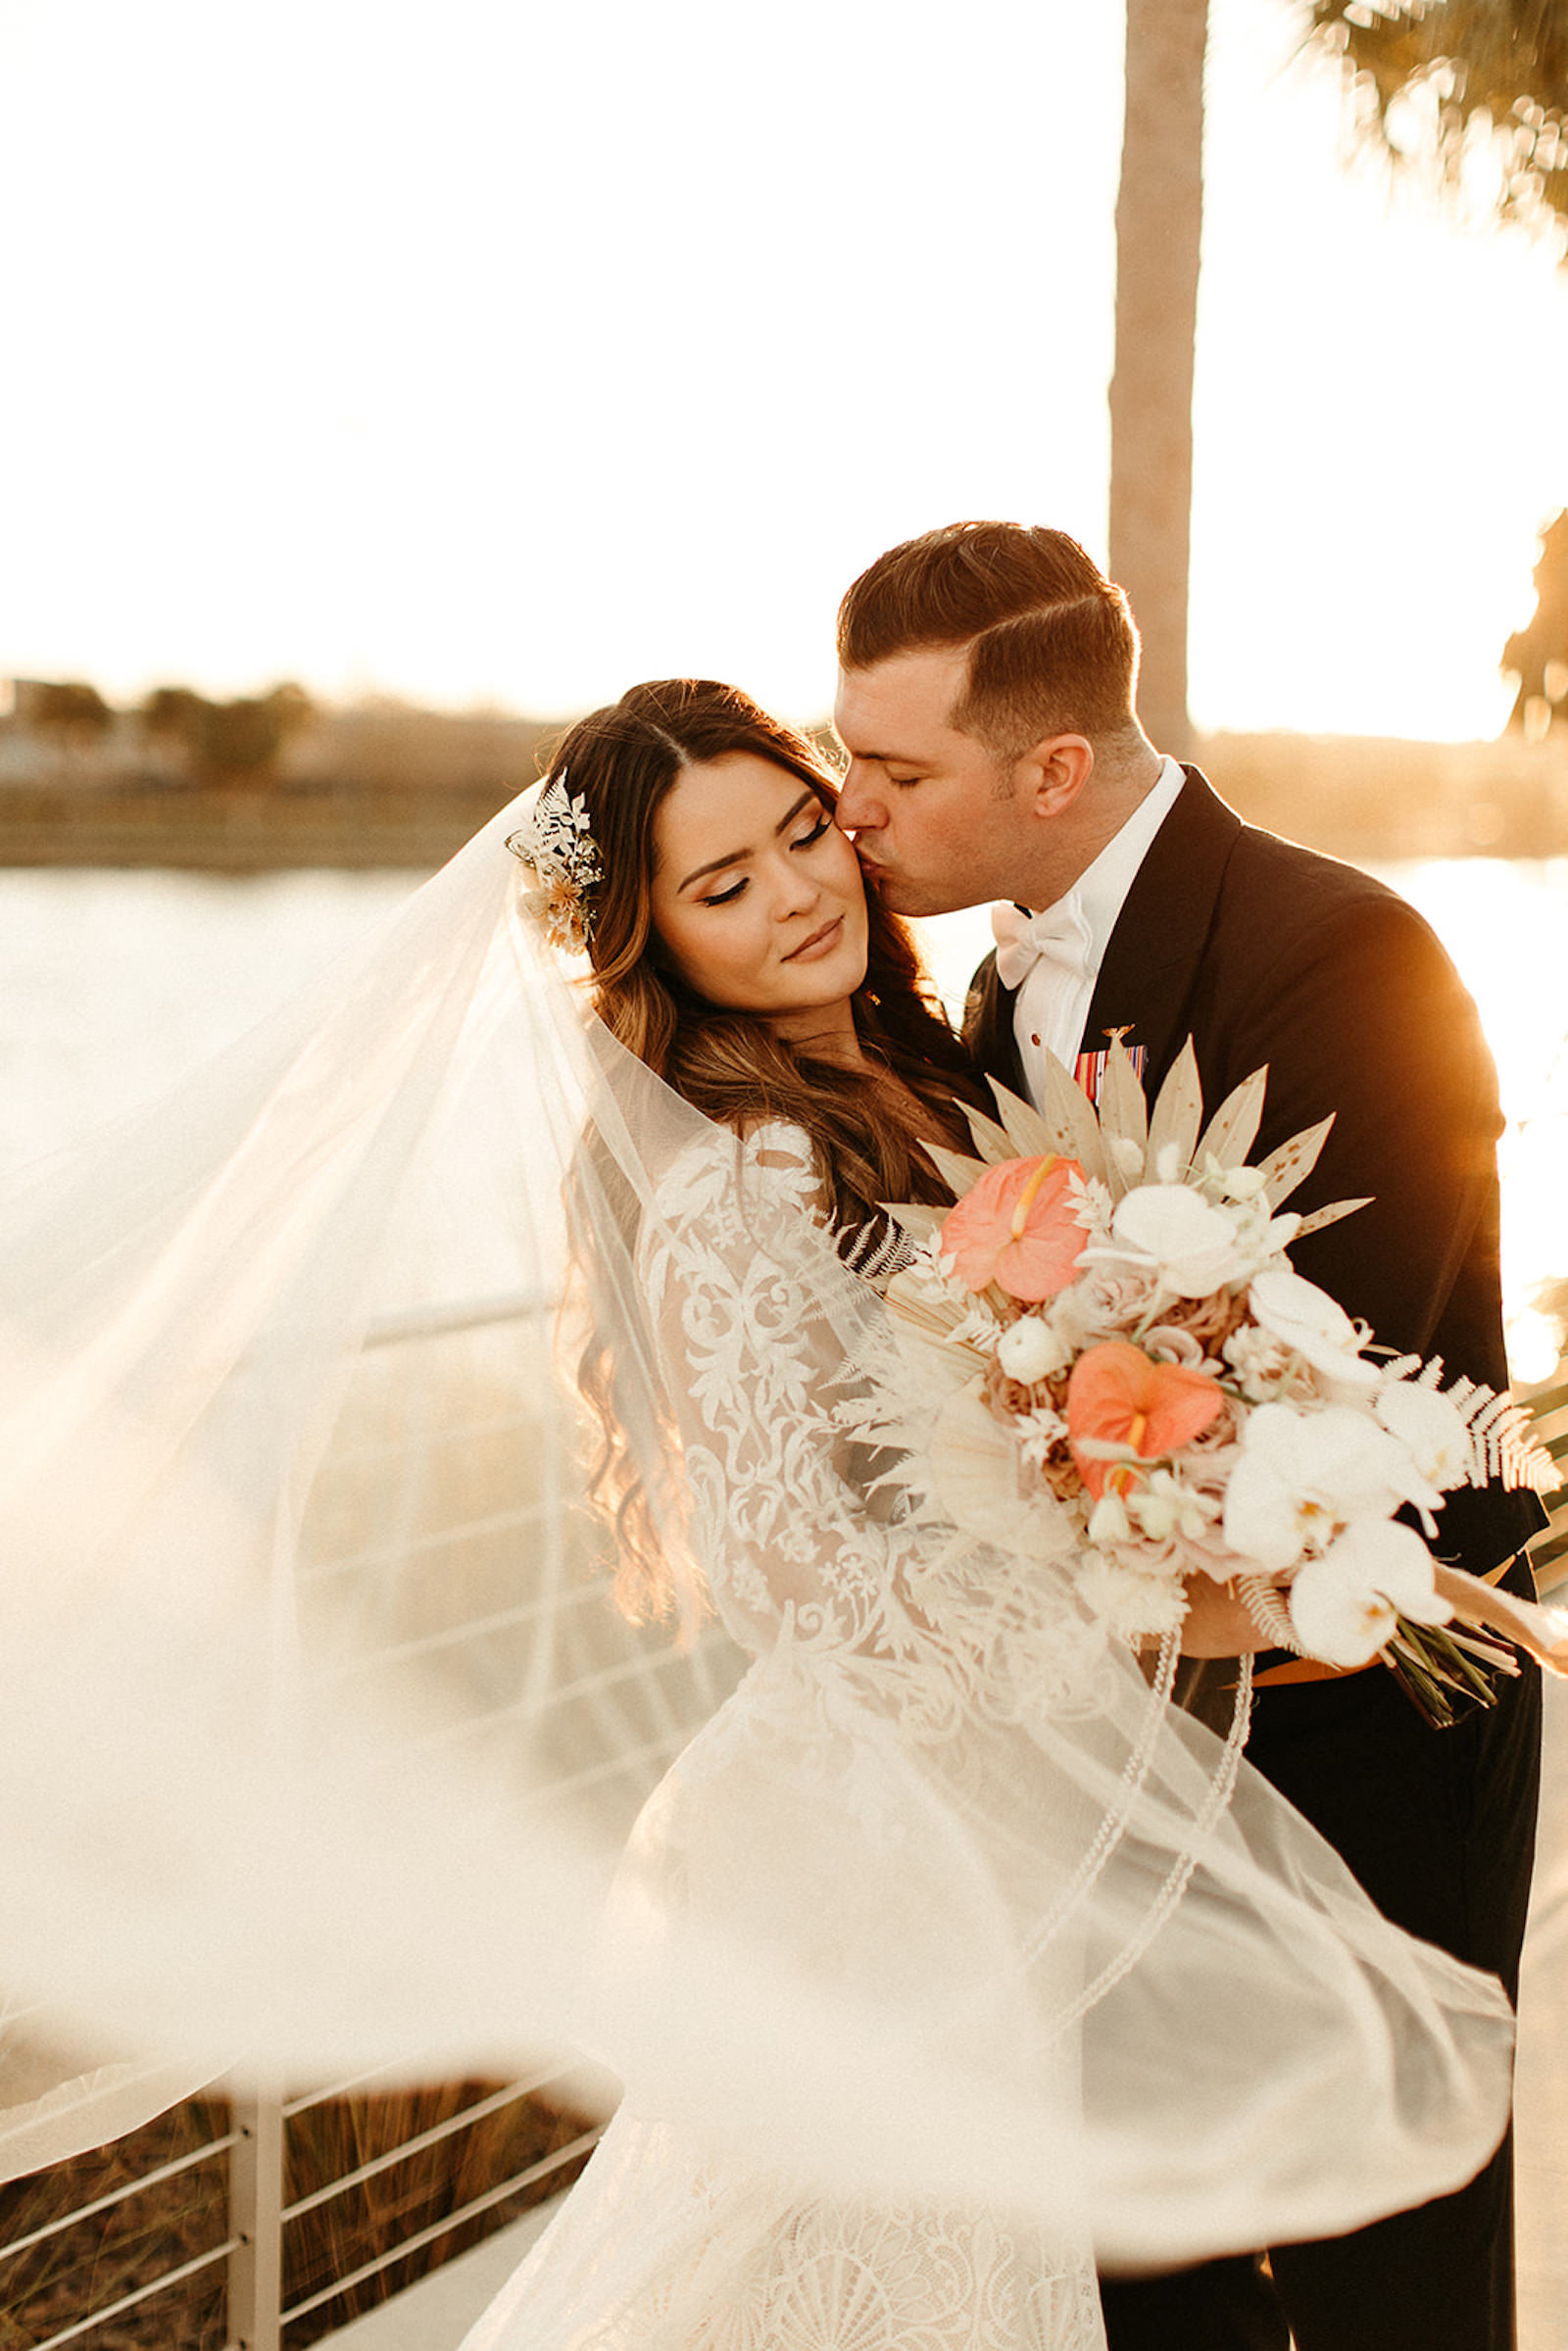 Earthy Neutral Boho Modern Chic Bride and Groom Sunset Wedding Portrait with Veil Blowing Holding Dried Leaves, White Orchids, Pink Anthuriums Floral Bouquet | Tampa Bay Wedding Florist Save the Date Florida